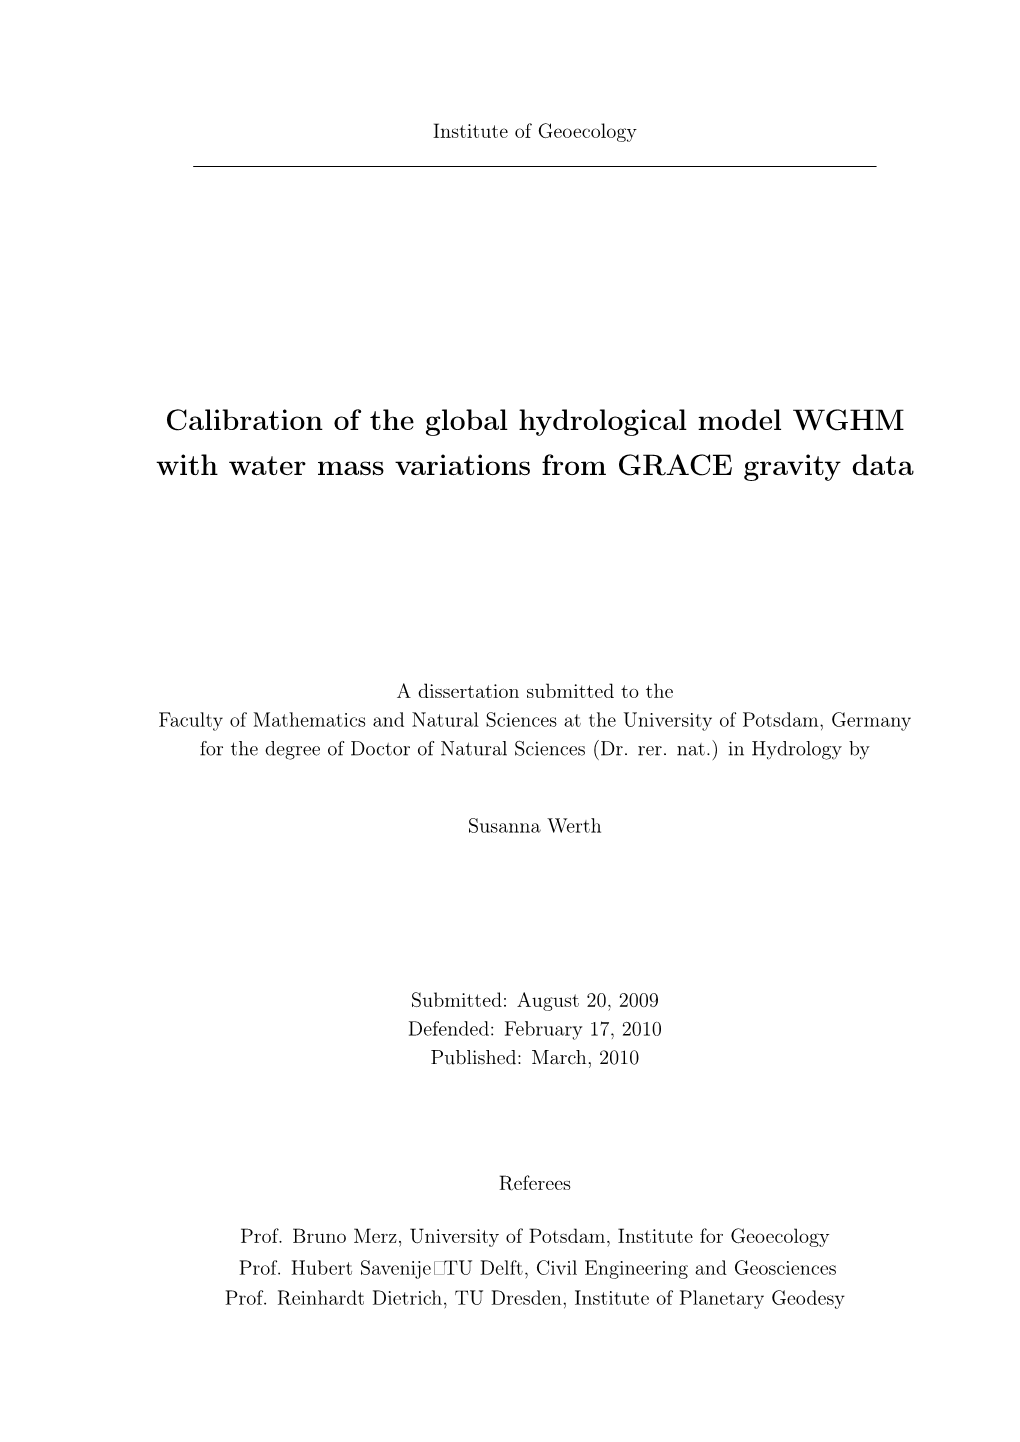 Calibration of the Global Hydrological Model WGHM with Water Mass Variations from GRACE Gravity Data